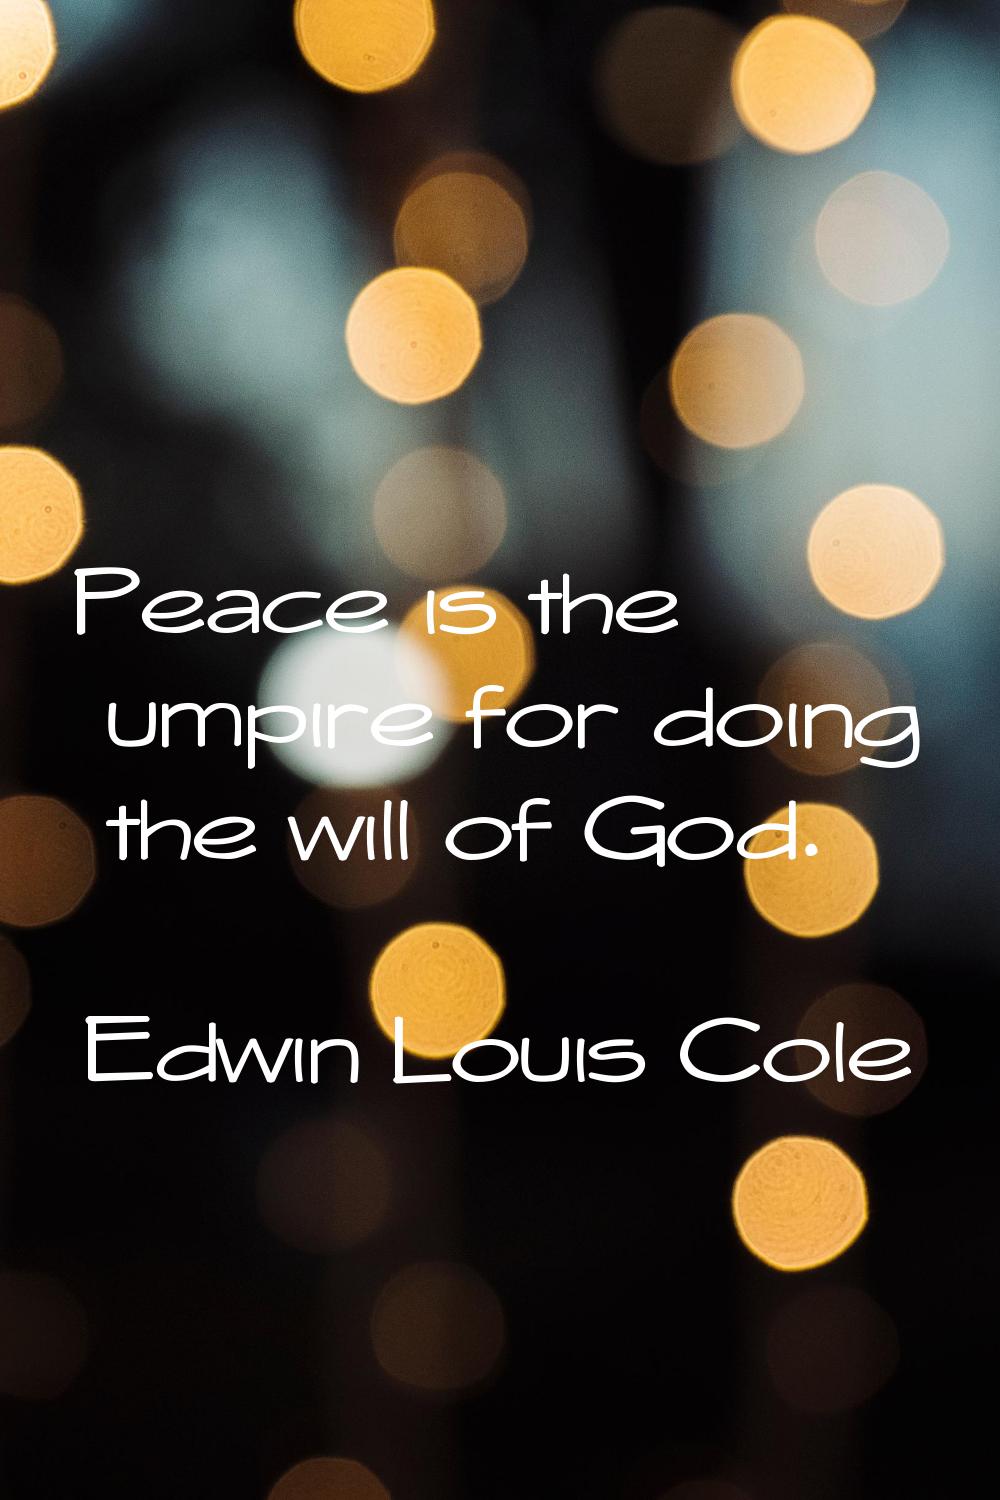 Peace is the umpire for doing the will of God.